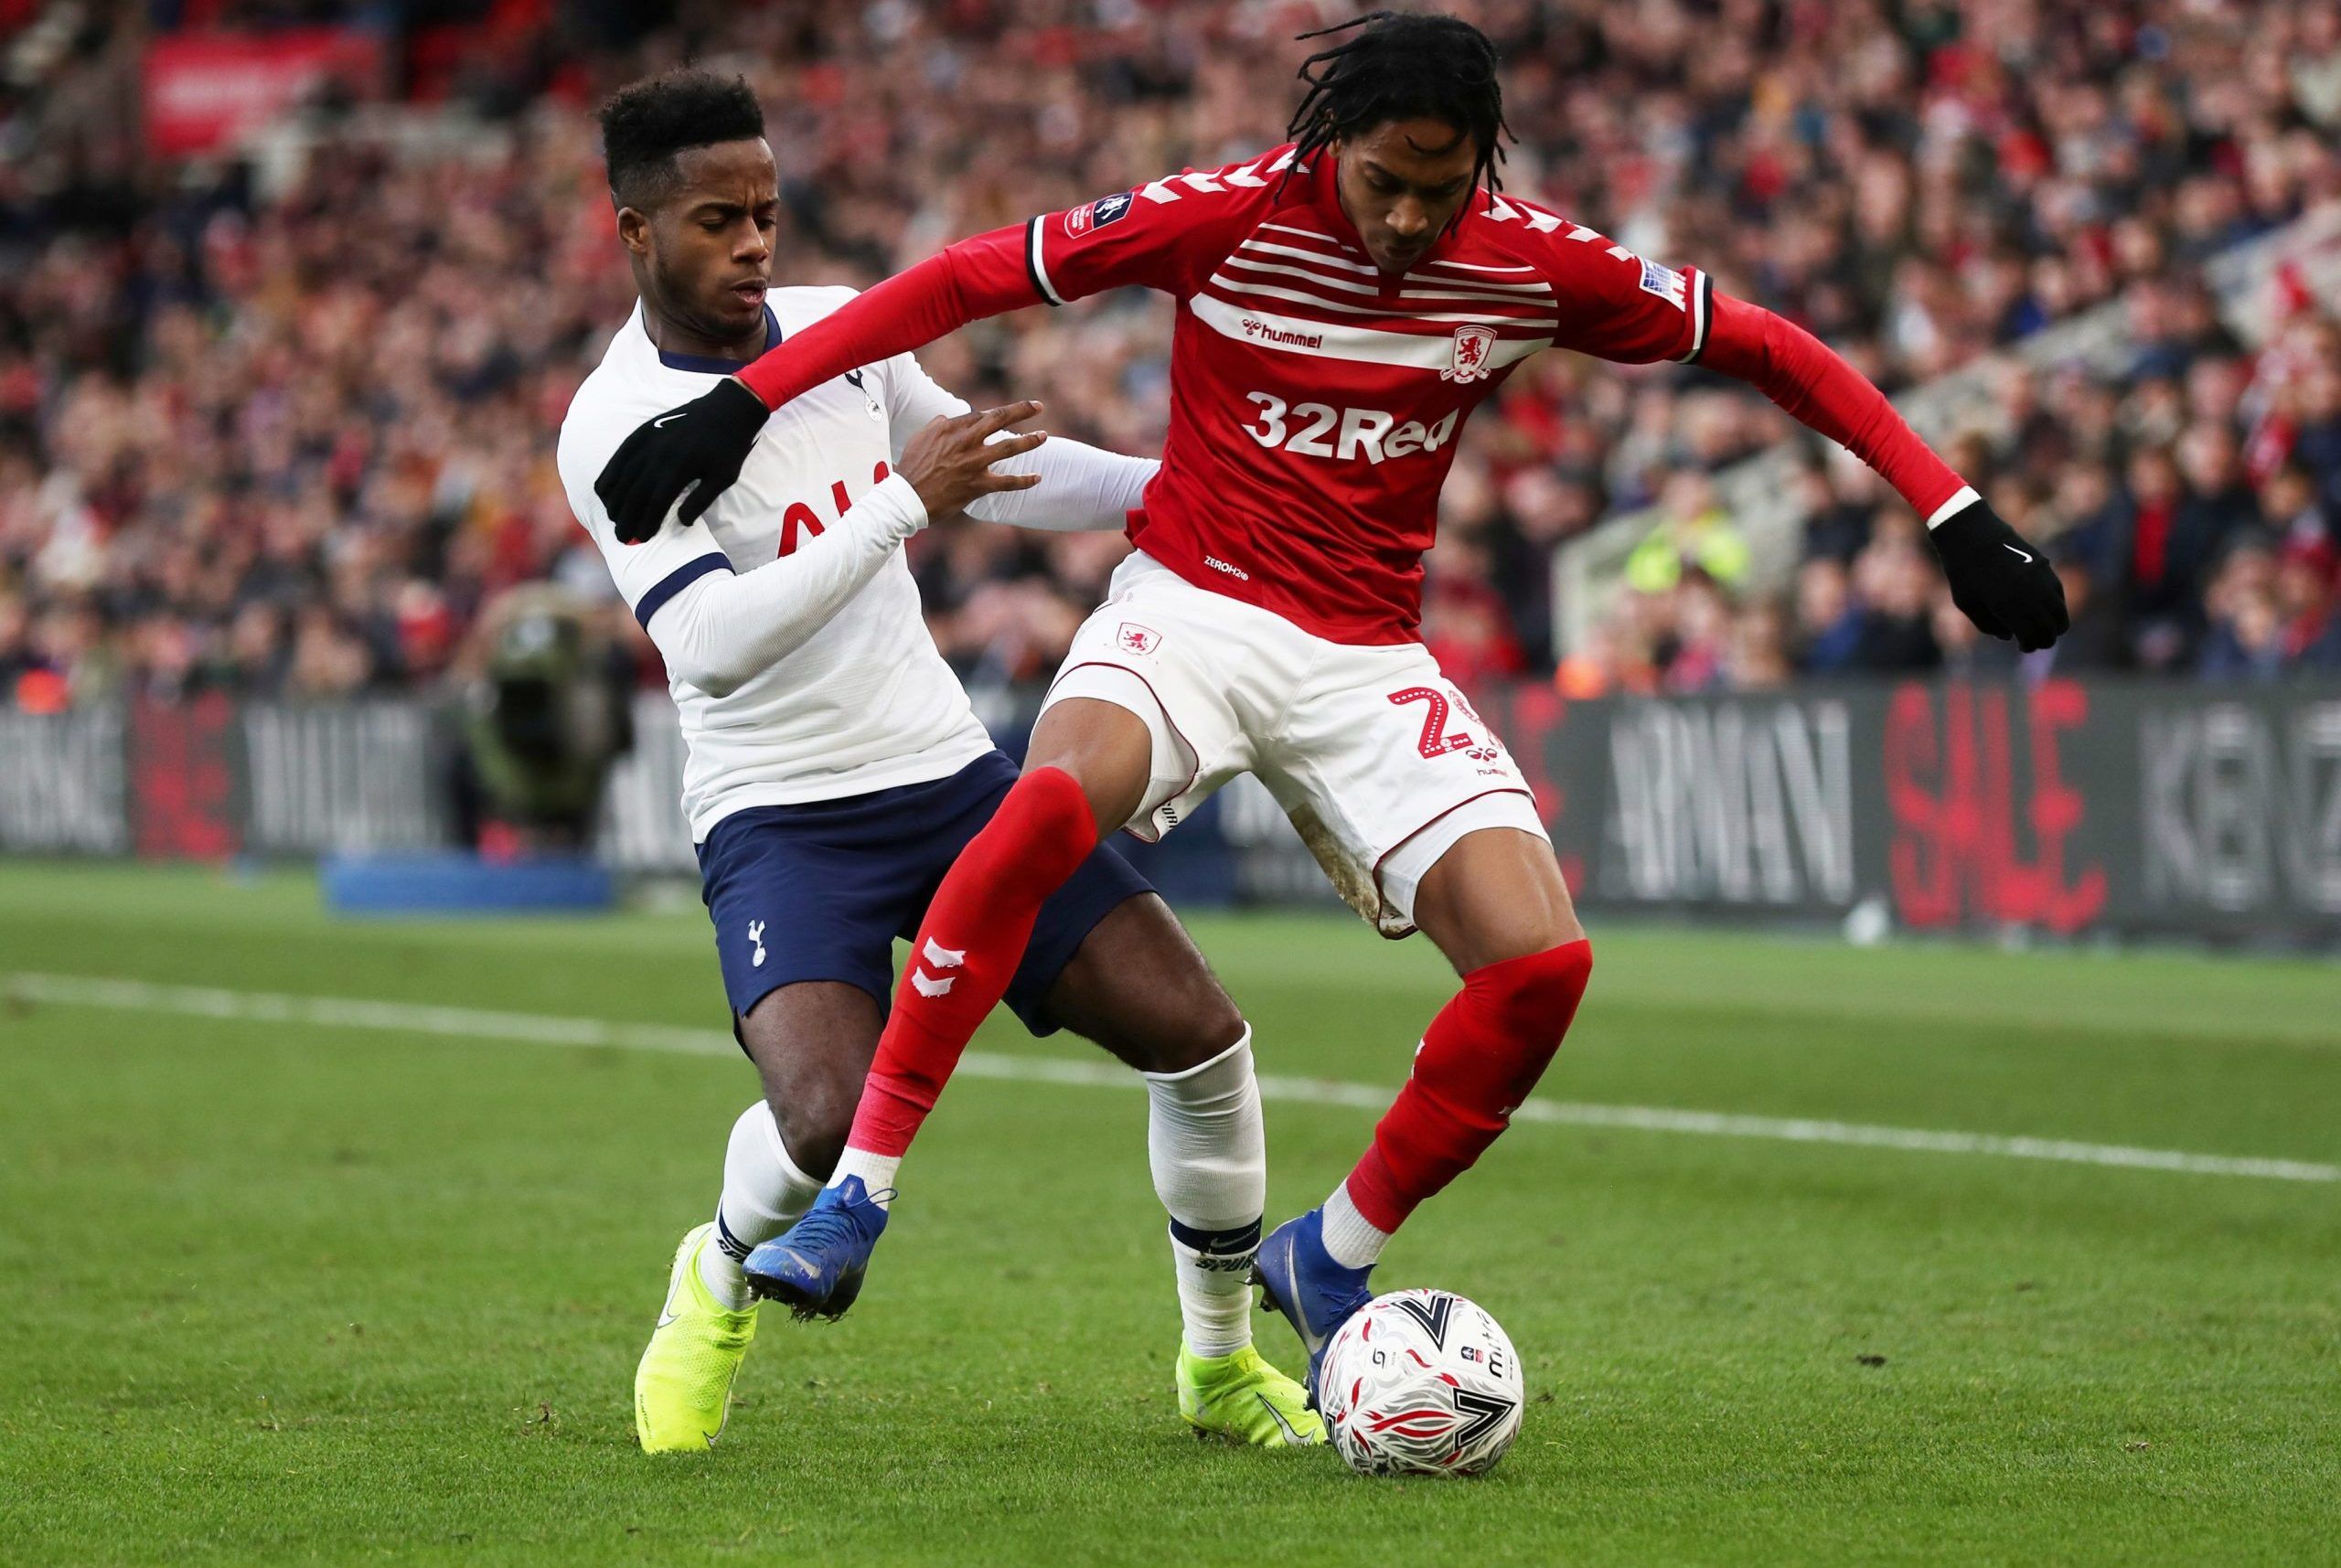 Soccer Football - FA Cup - Third Round - Middlesbrough v Tottenham Hotspur - Riverside Stadium, Middlesbrough, Britain - January 5, 2020  Middlesbrough's Djed Spence in action with Tottenham Hotspur's Ryan Sessegnon   Action Images via Reuters/Lee Smith